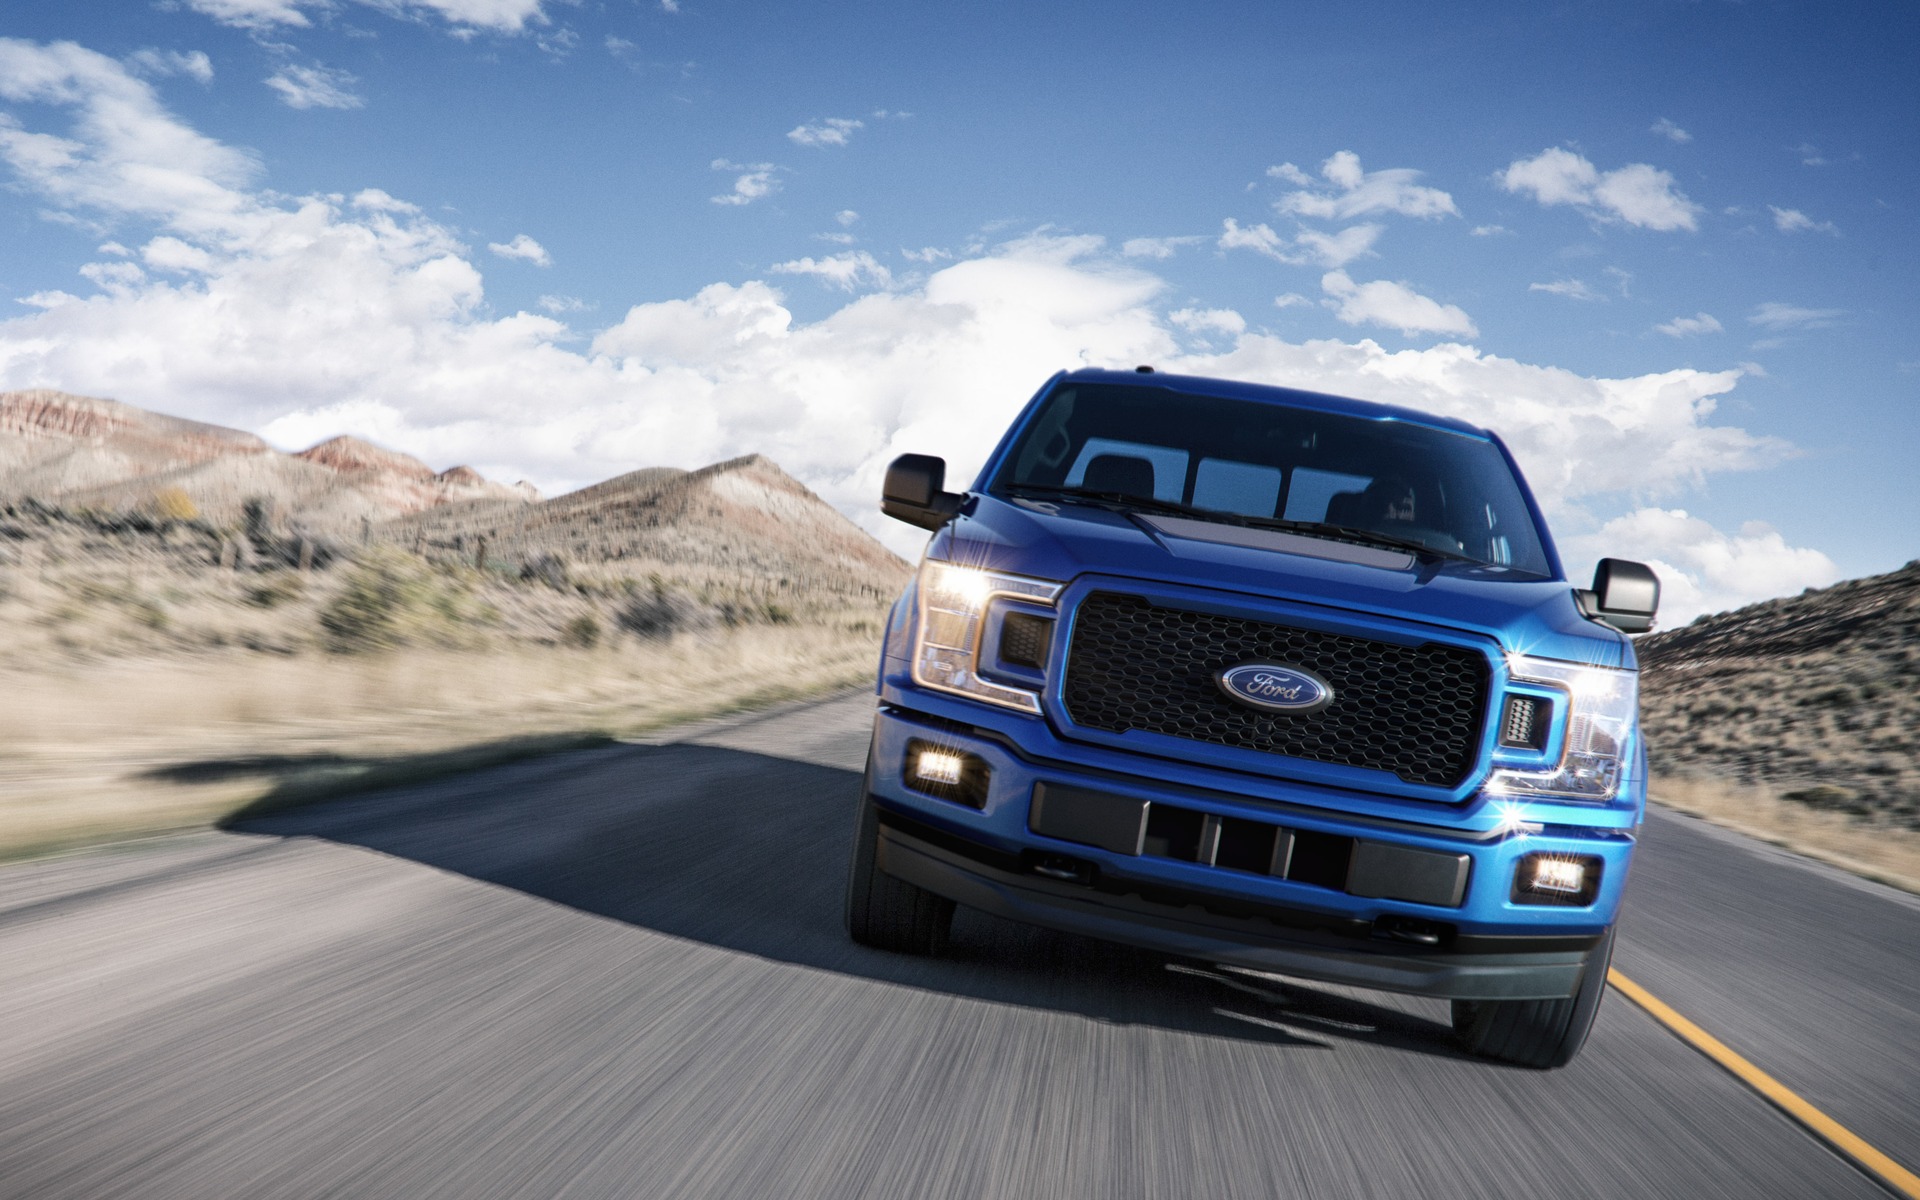 Ford fwd. Ford f150. Ford 150. Форд f150 2018. Джип Форд f150.